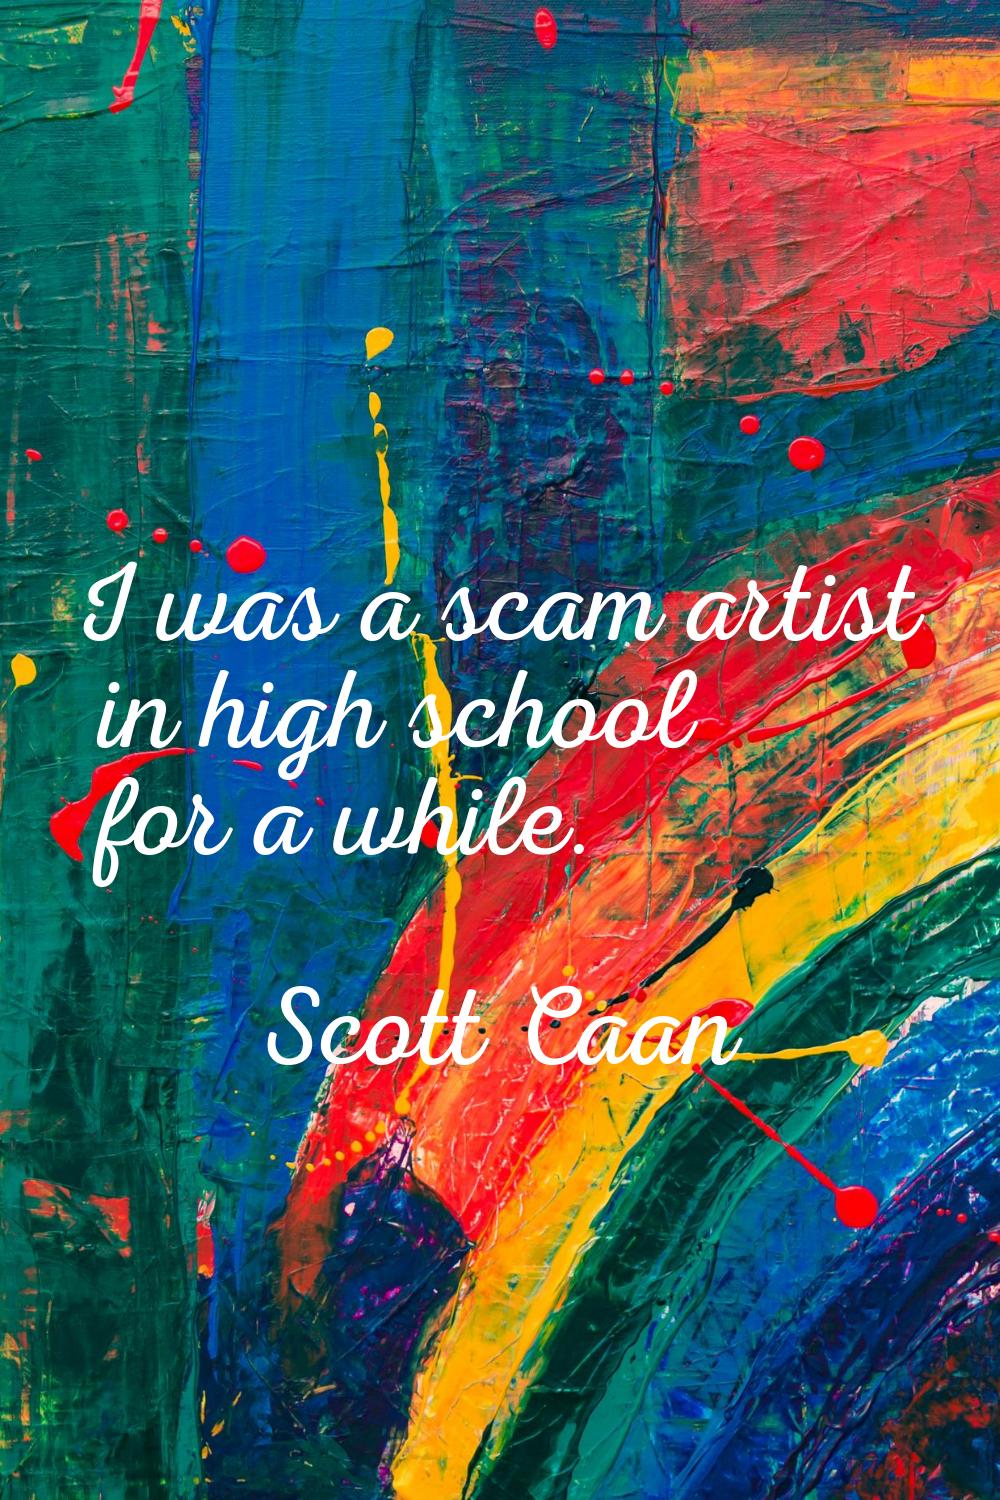 I was a scam artist in high school for a while.